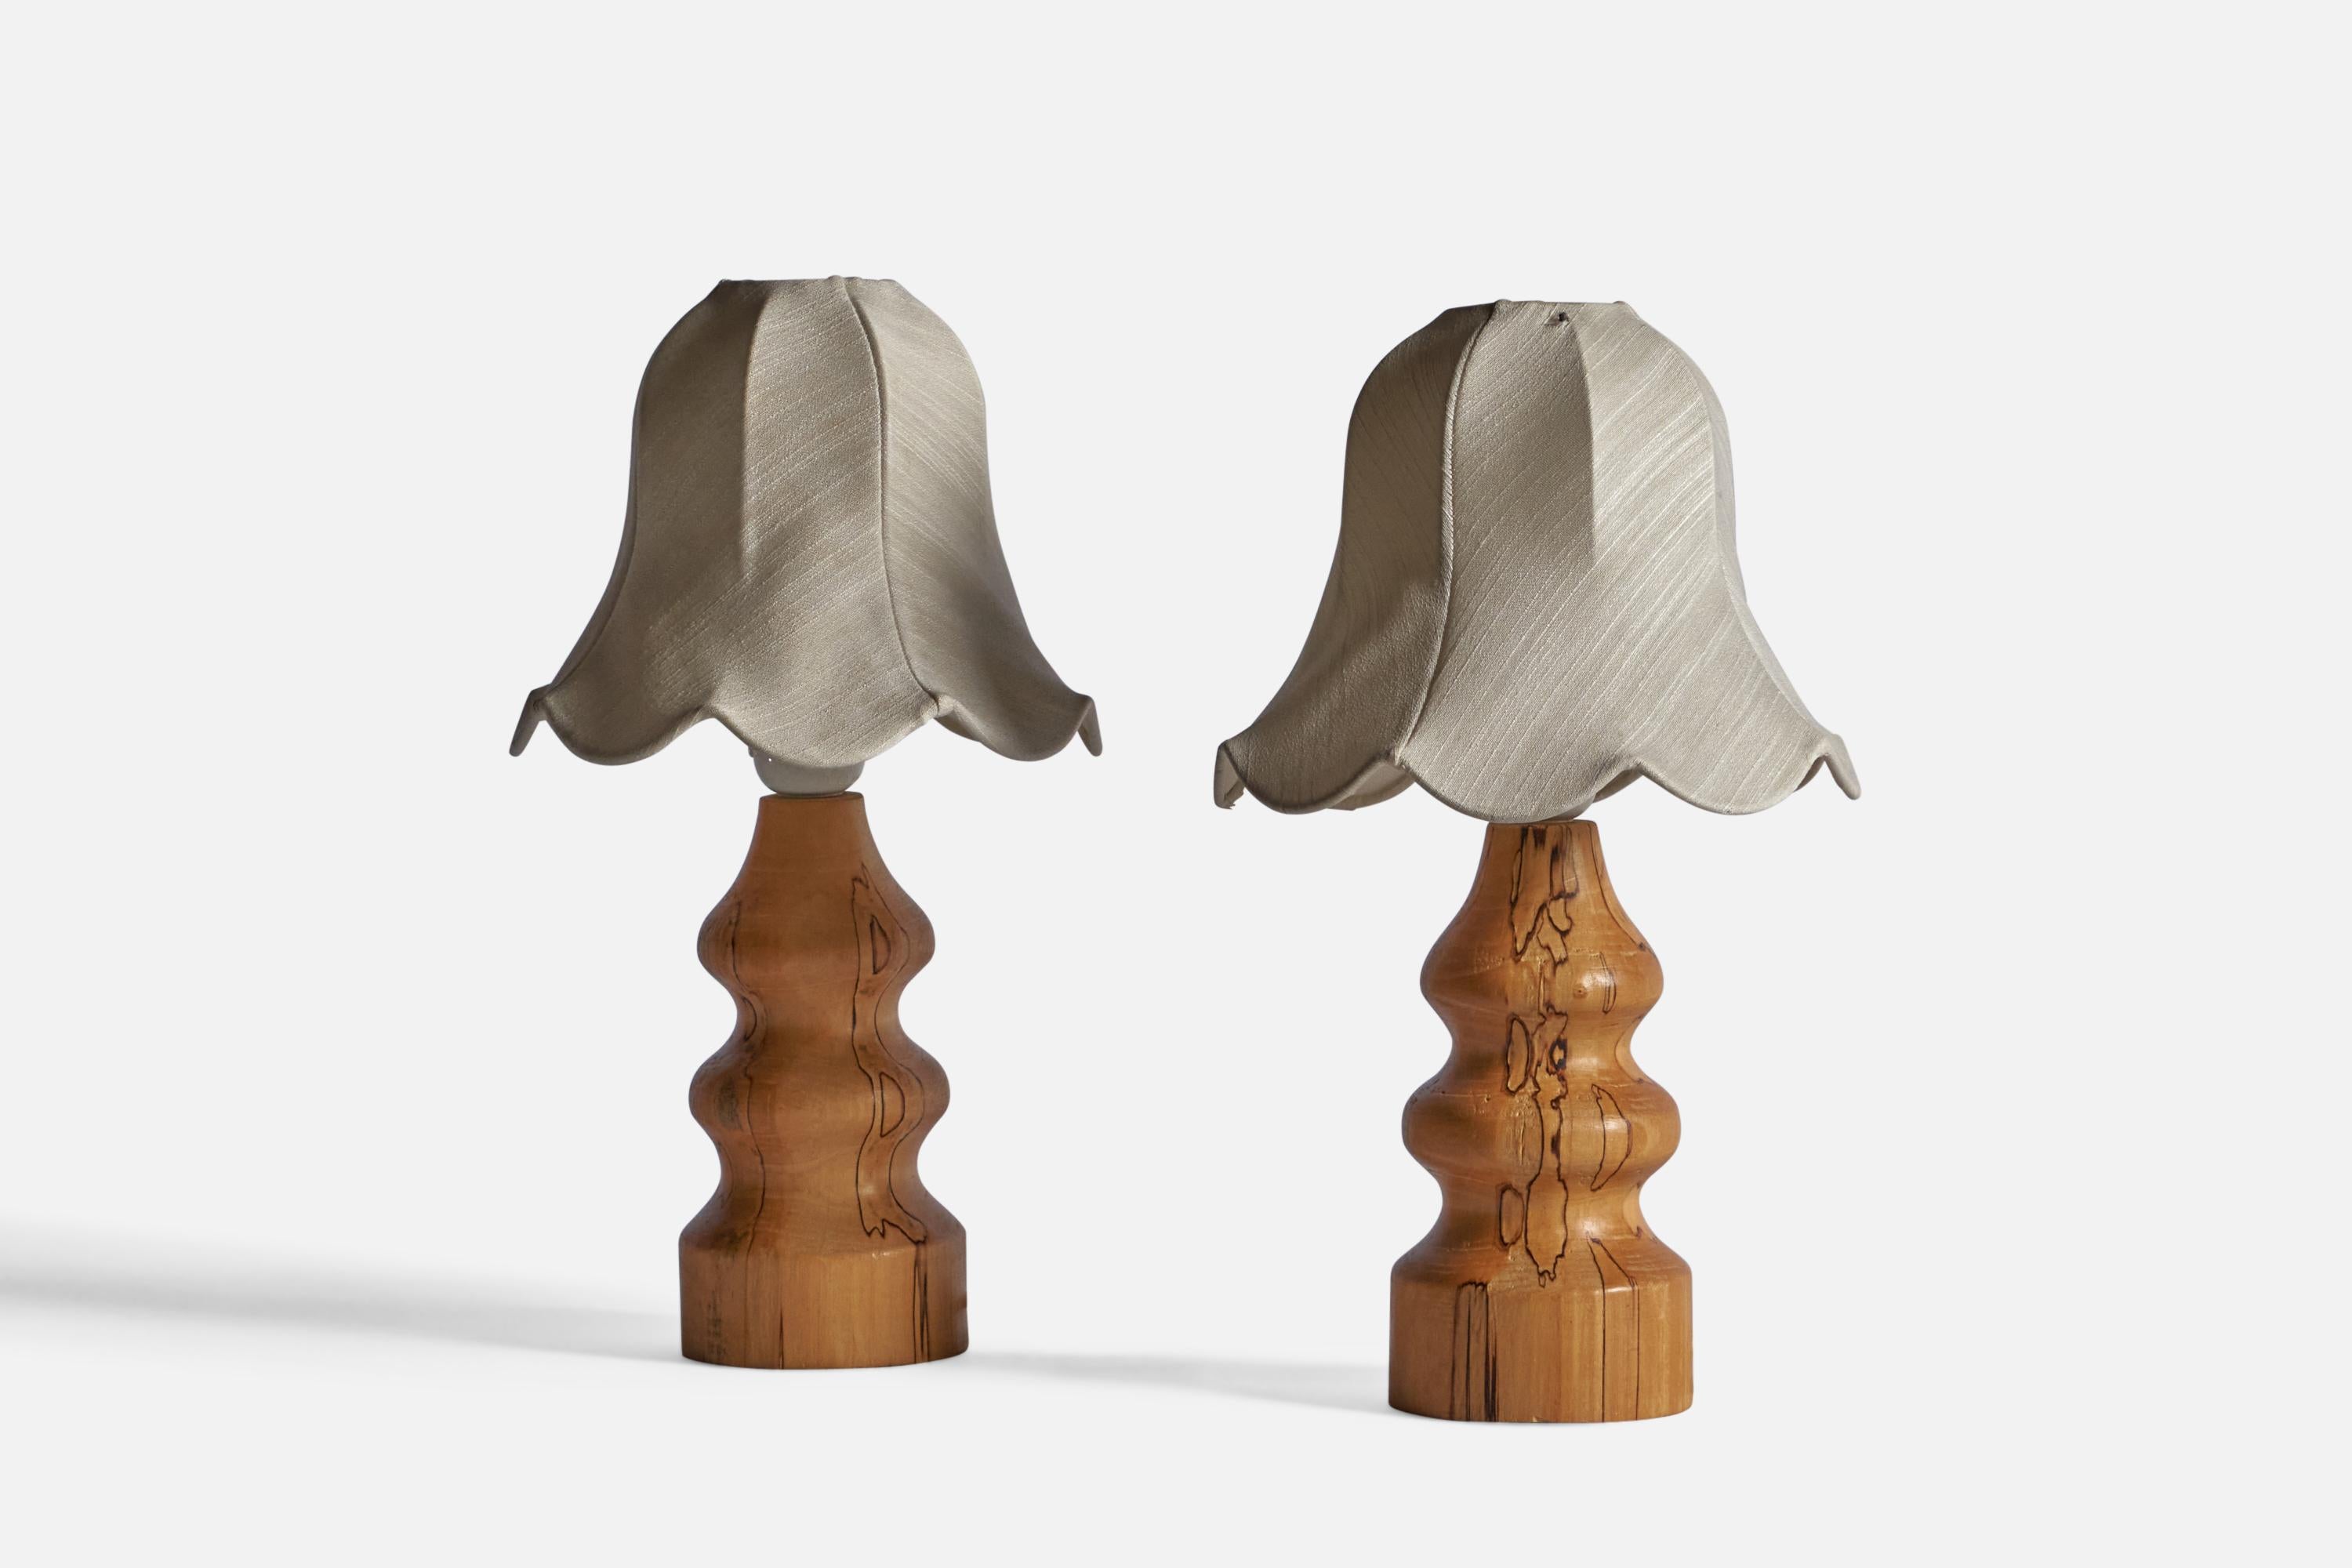 A pair of masur birch and fabric table lamps, designed and produced in Sweden, c. 1960s.

Sold with Lampshades.

Dimensions stated are of table lamps with Lampshades attached.